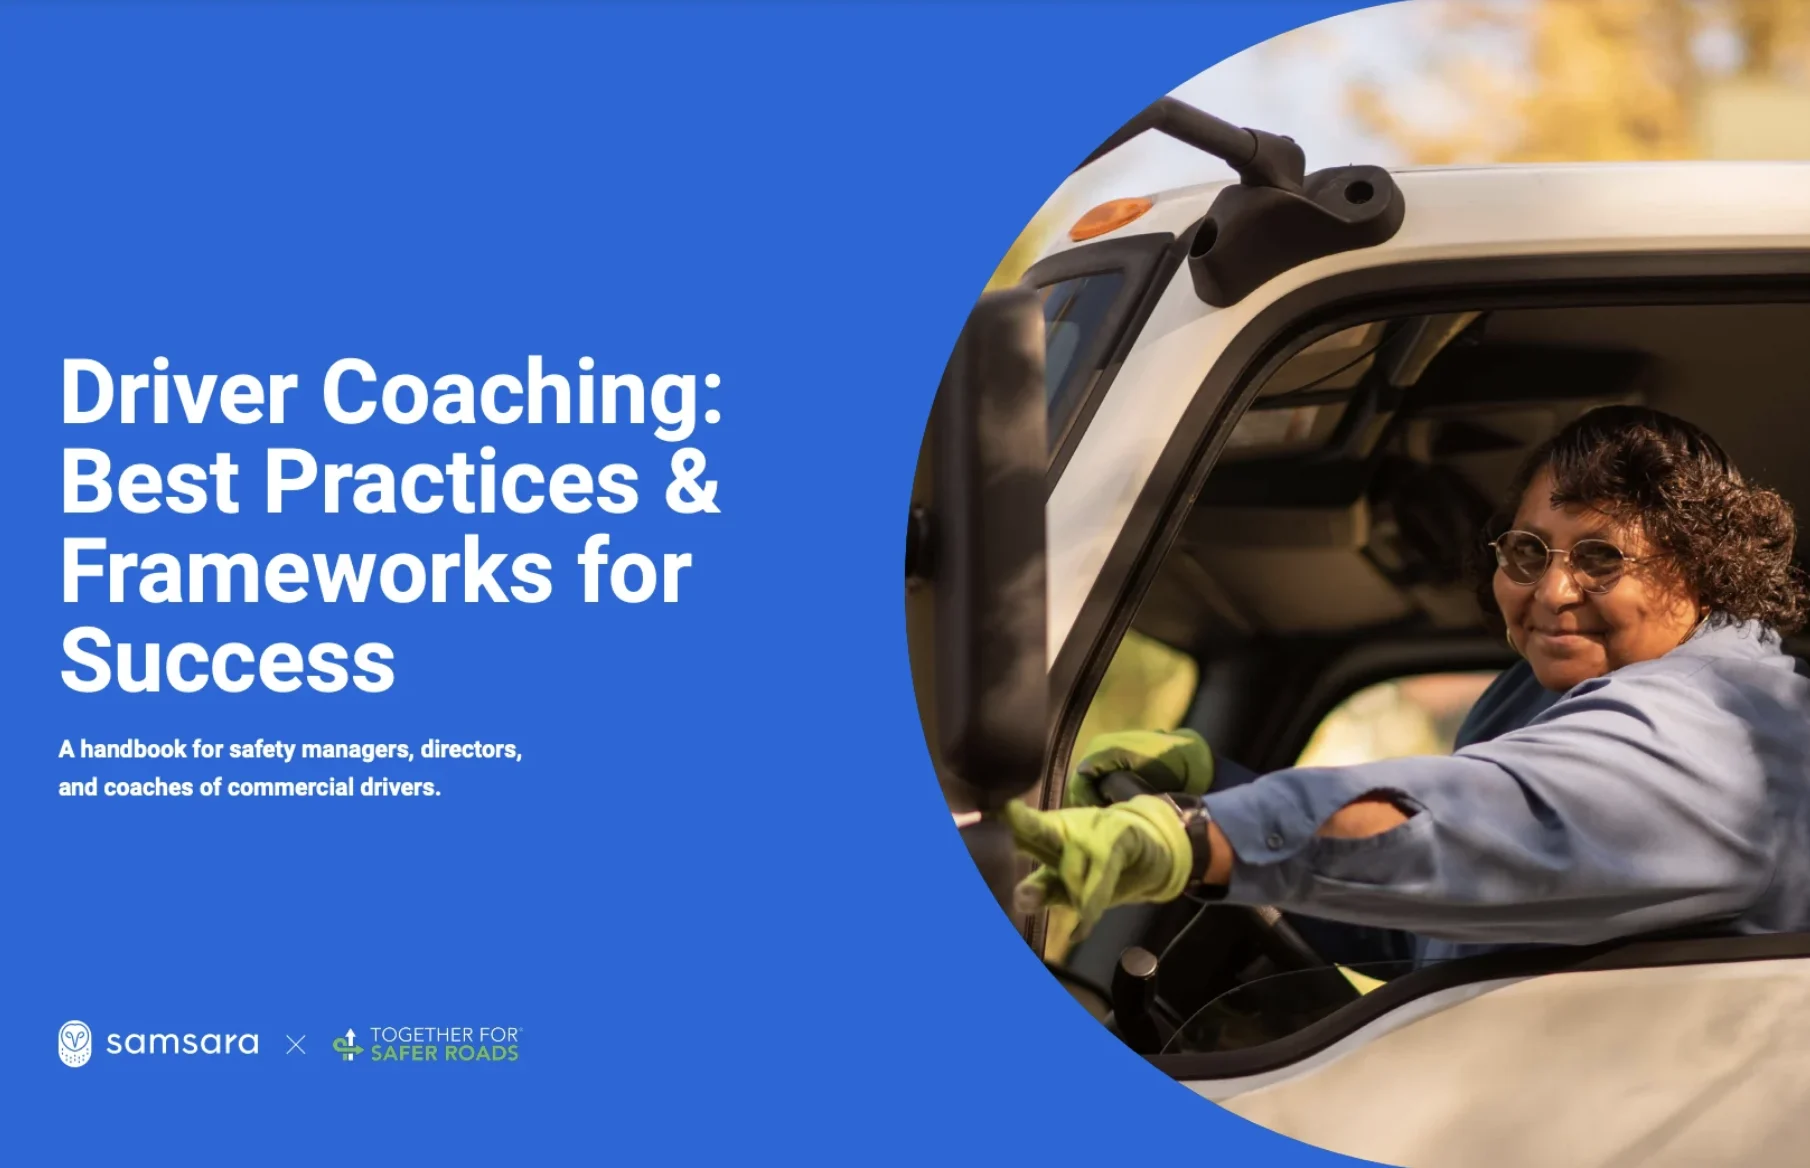 Driver Coaching: Best Practices & Frameworks for Success